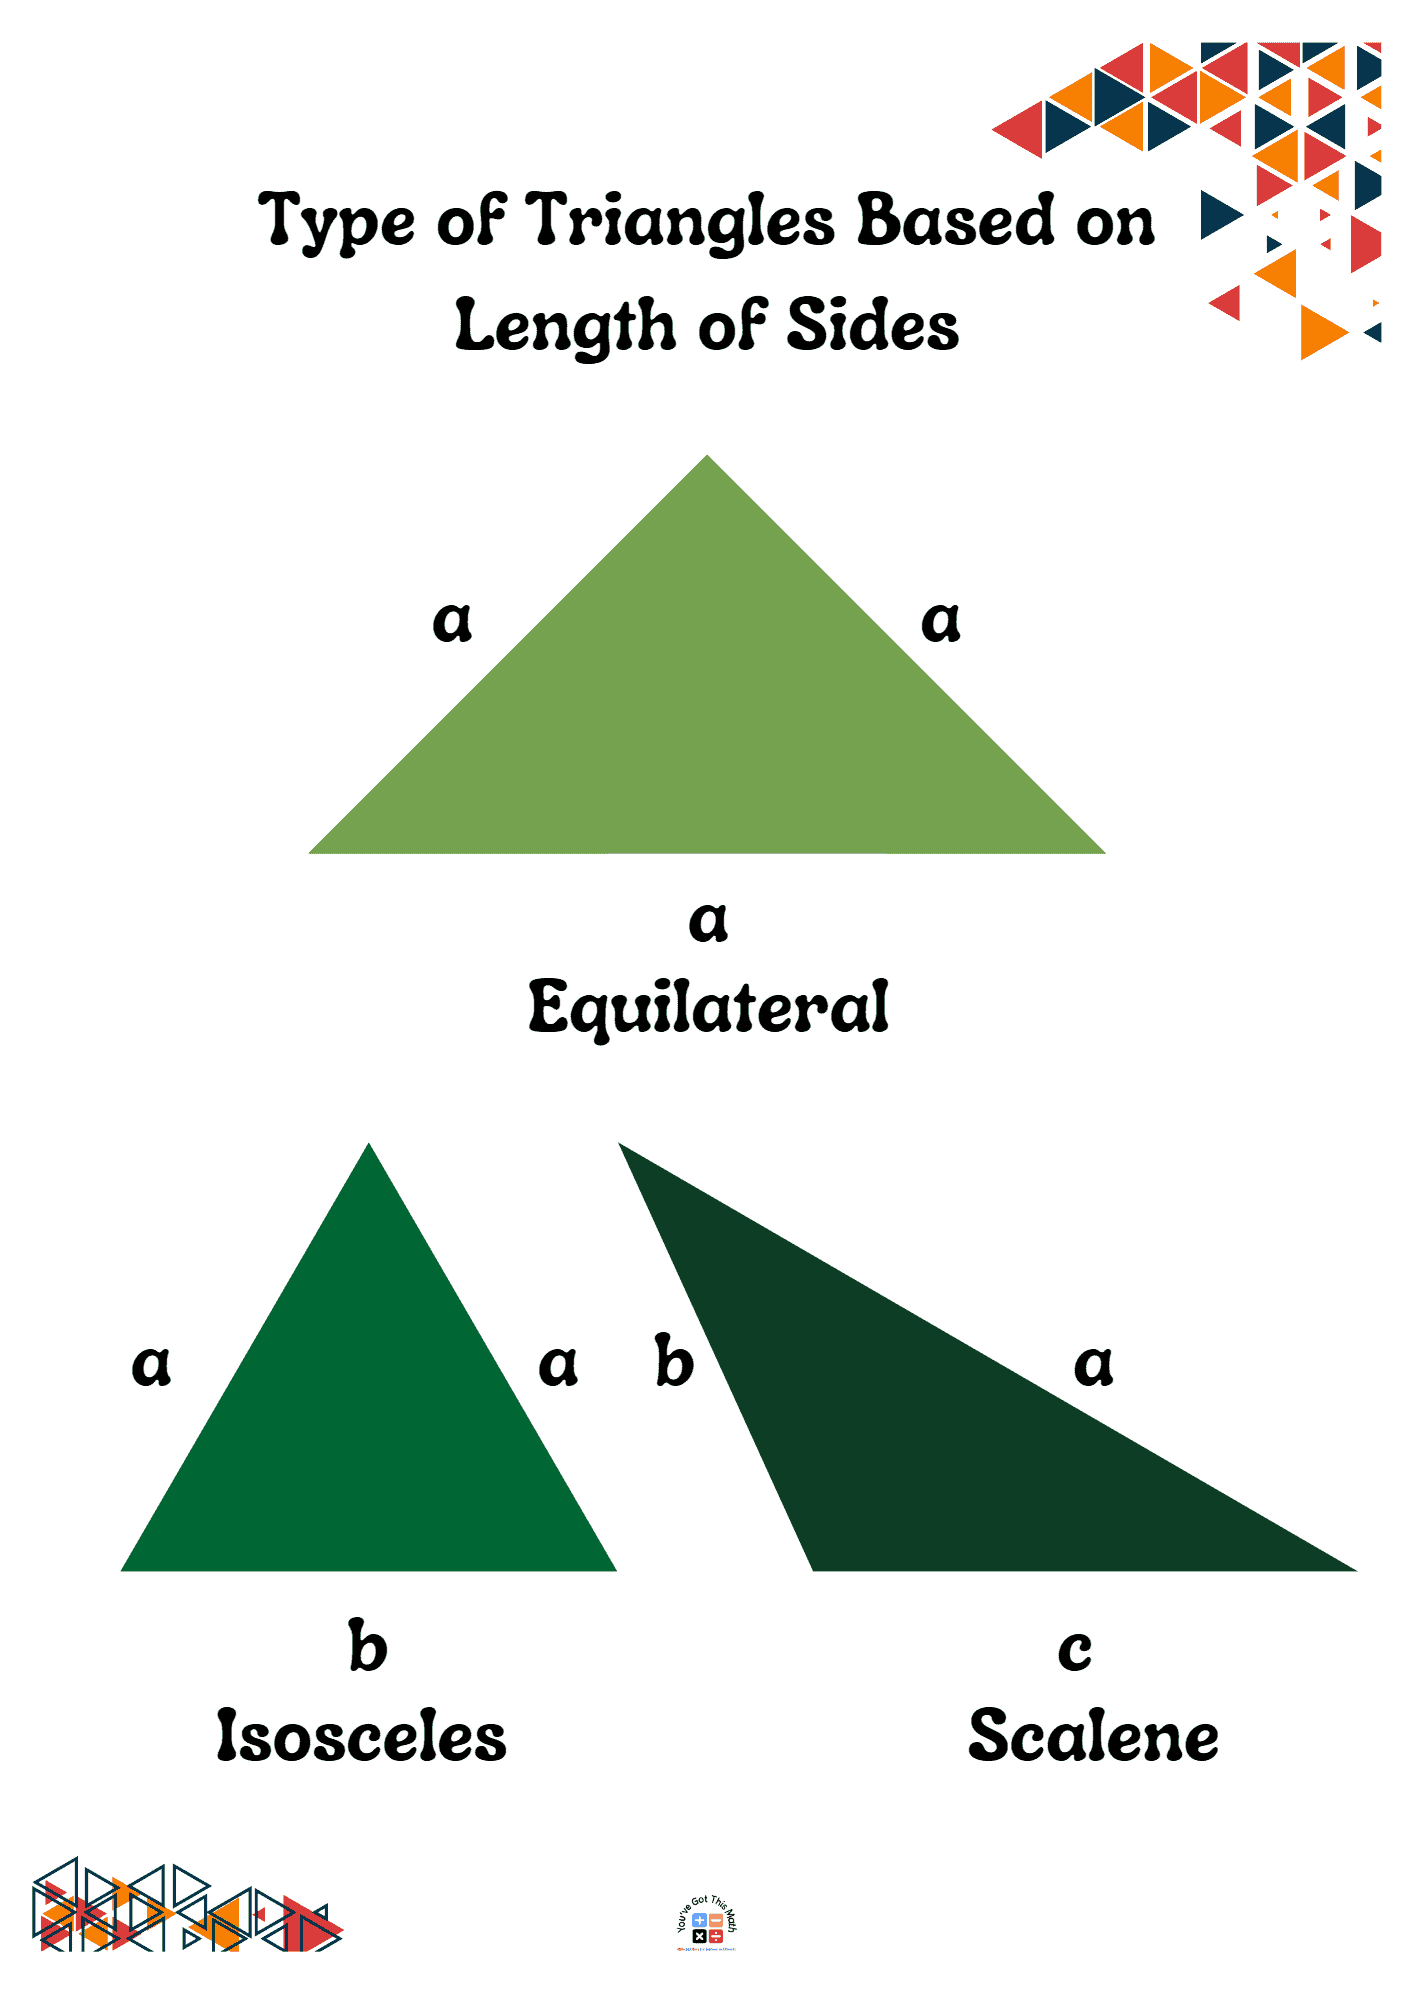 Showing Different Types of Triangles Based on Length of Sides